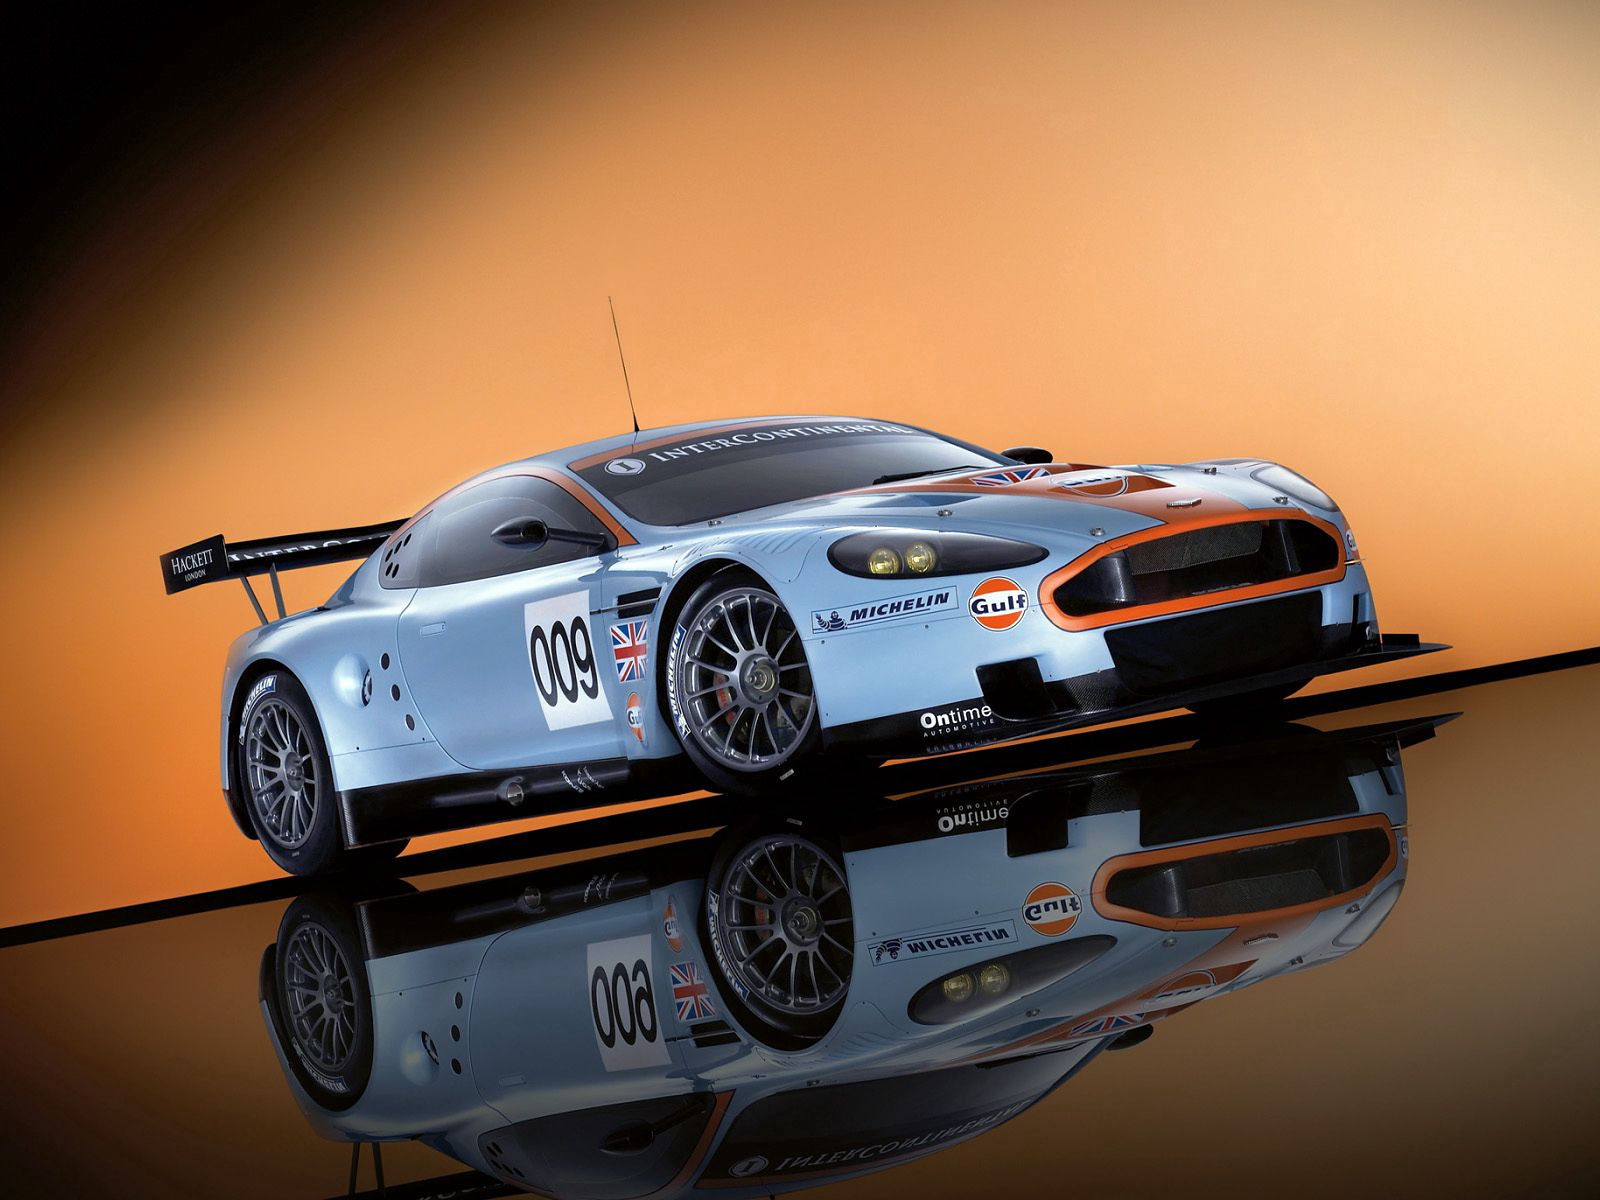 cars, auto, sports, aston martin, white, reflection, side view, style, 2008, dbr9 Aesthetic wallpaper